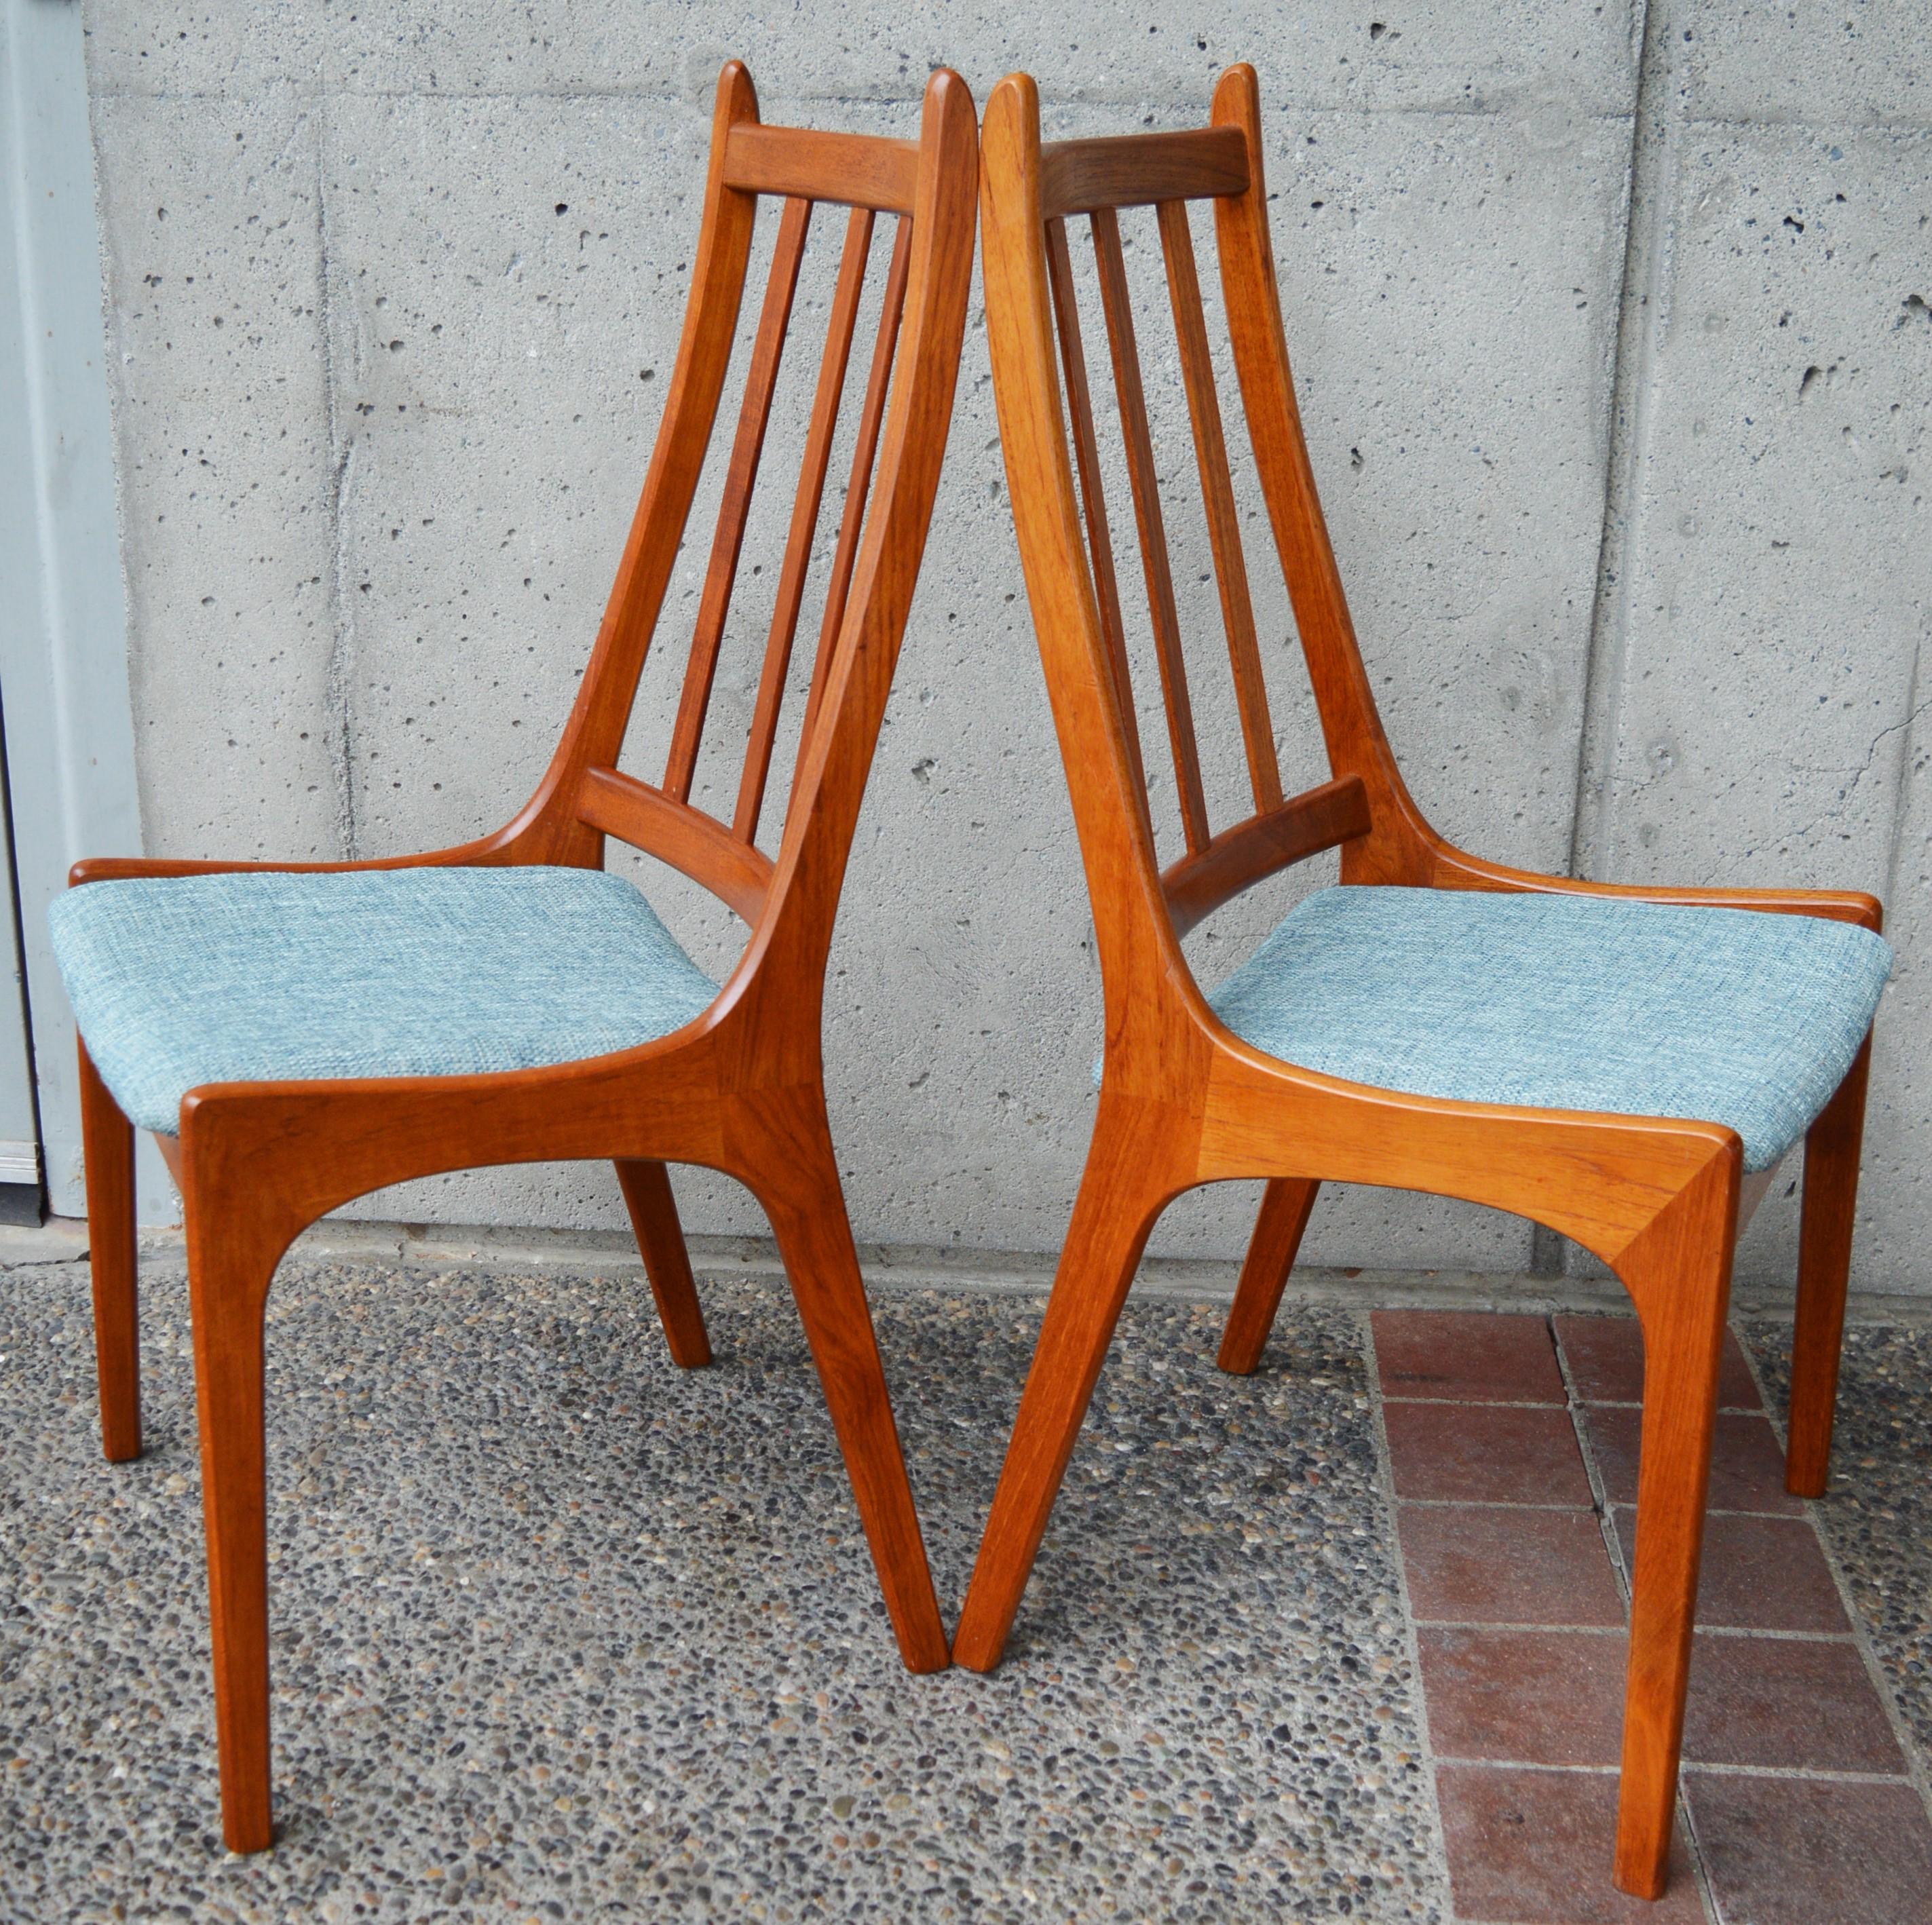 This lovely set of 6 Danish Modern teak dining chairs were designed by Kai Kristiansen in the 1960s. Featuring sculptural lines throughout, such as the arced detail under the base on the sides, the splayed back legs, and the subtle curve of the